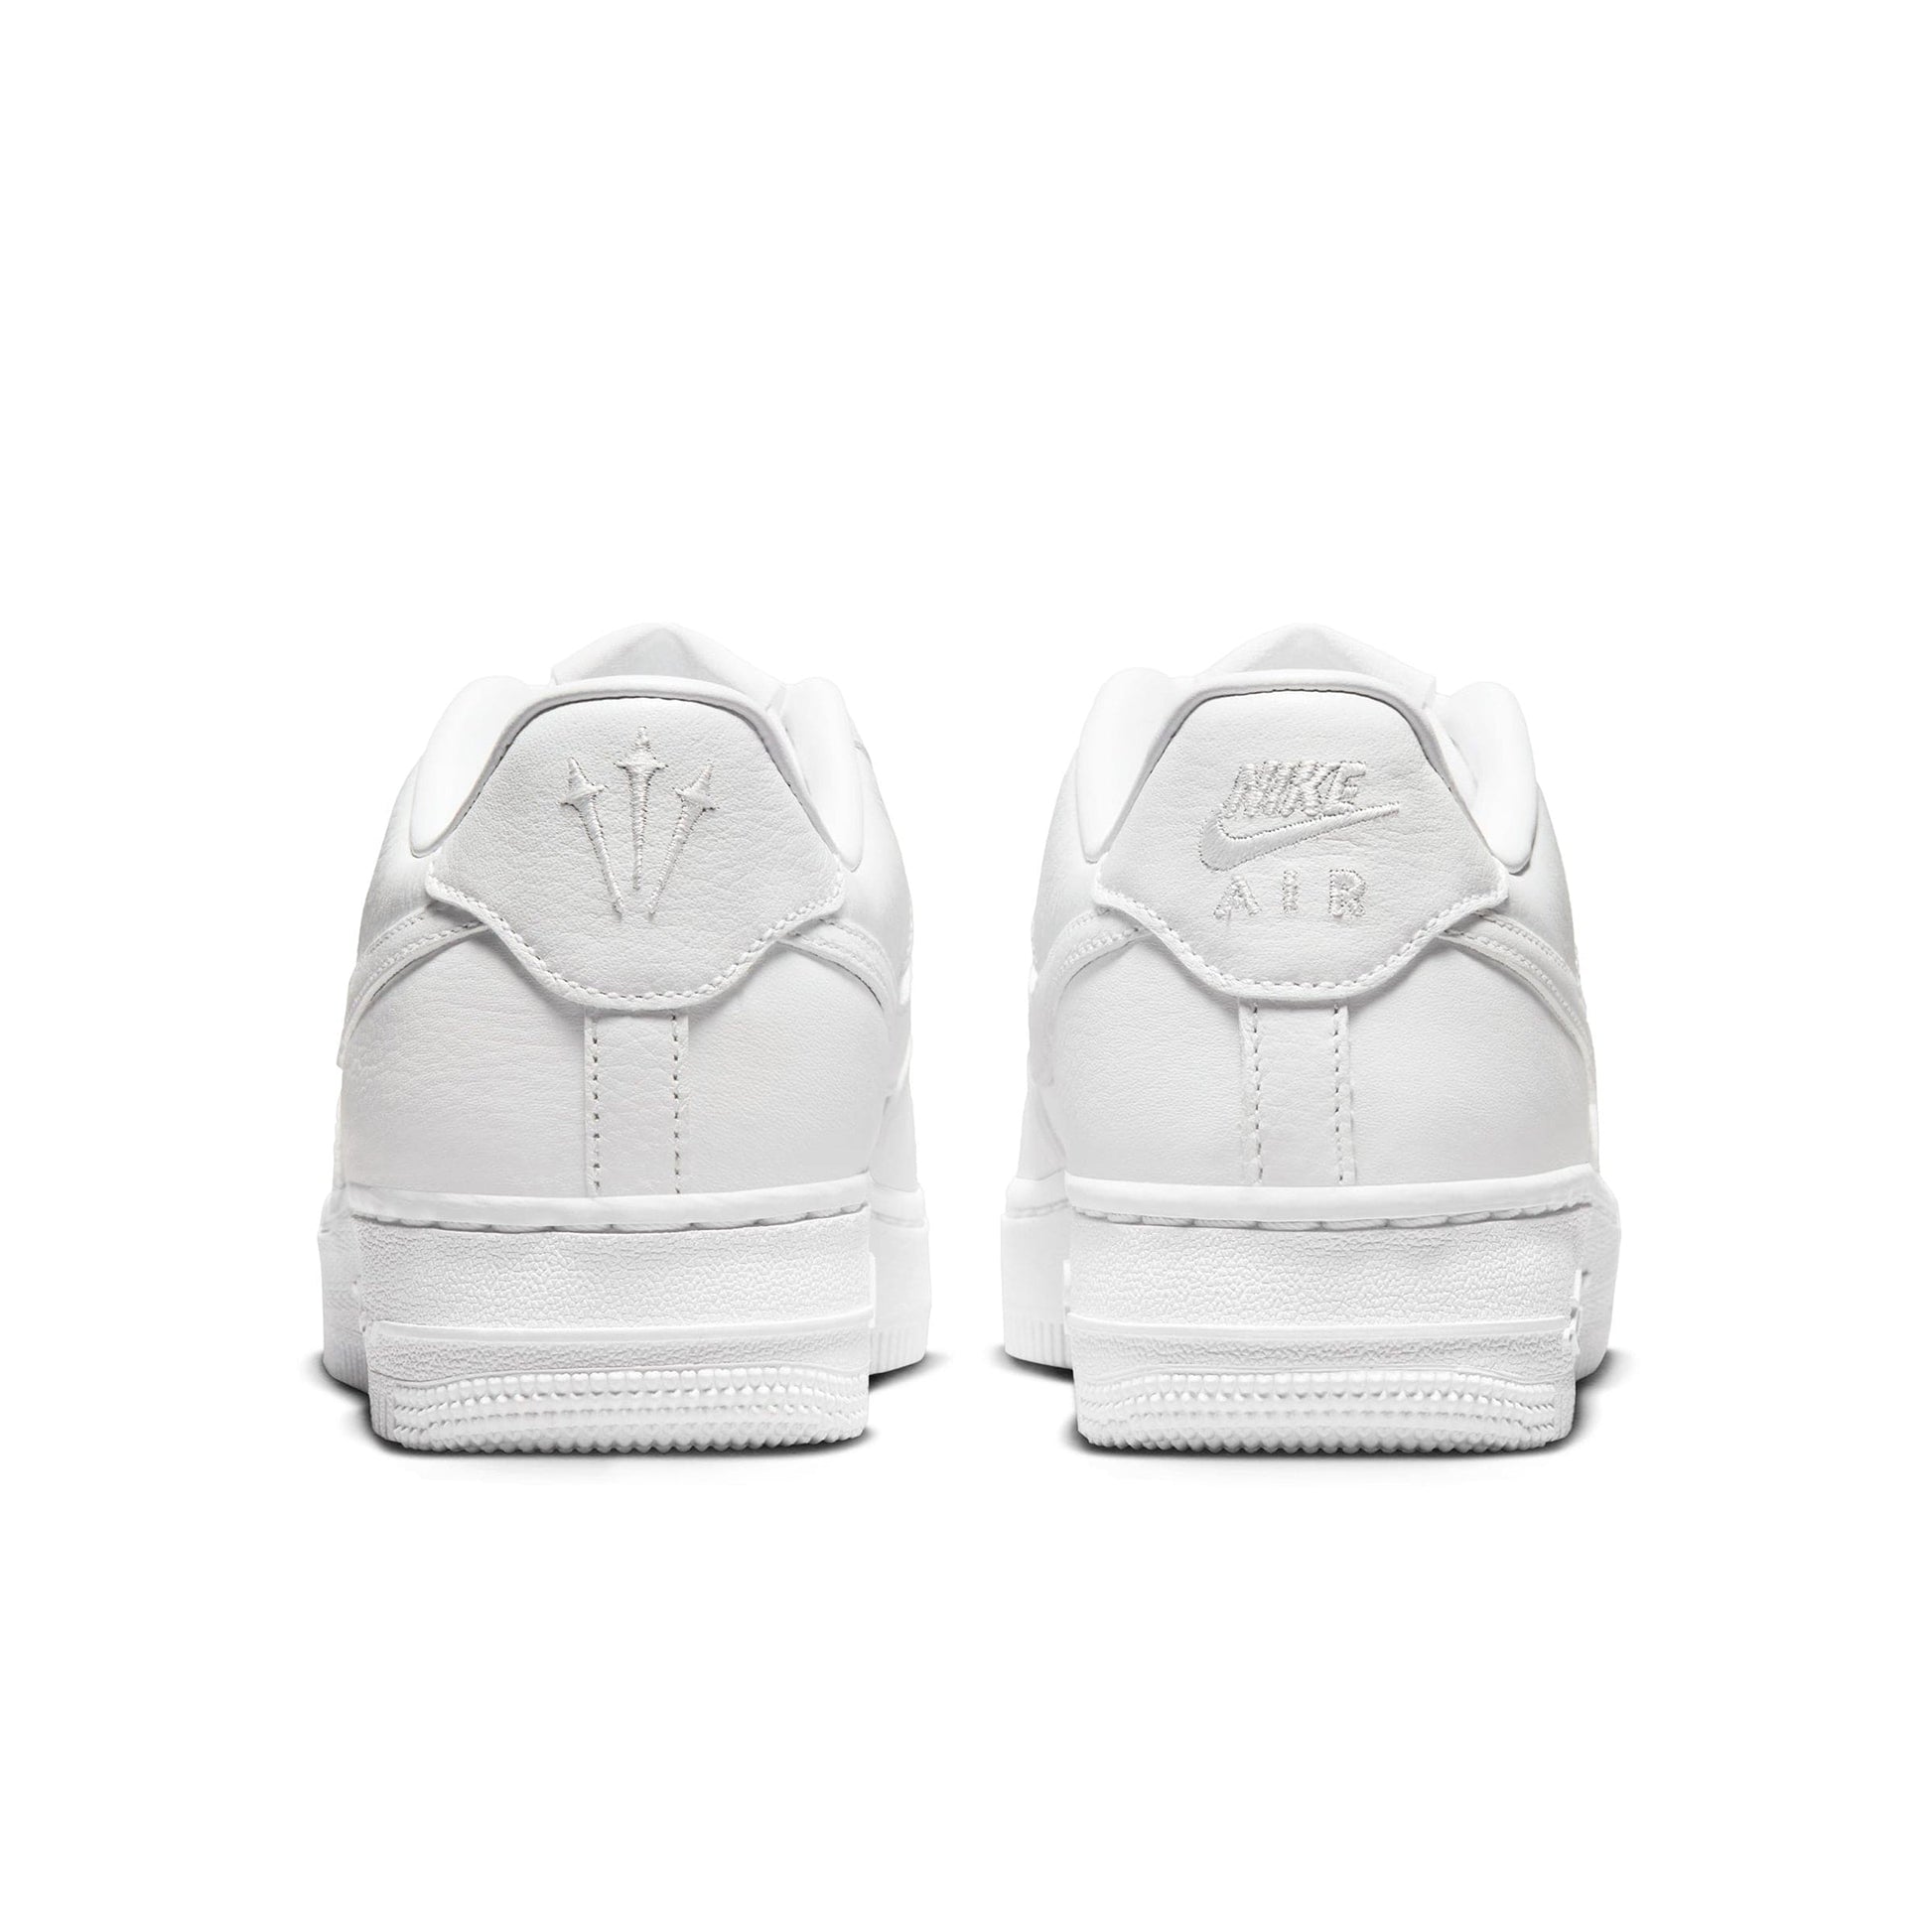 Nike Youth NOCTA AIR FORCE 1